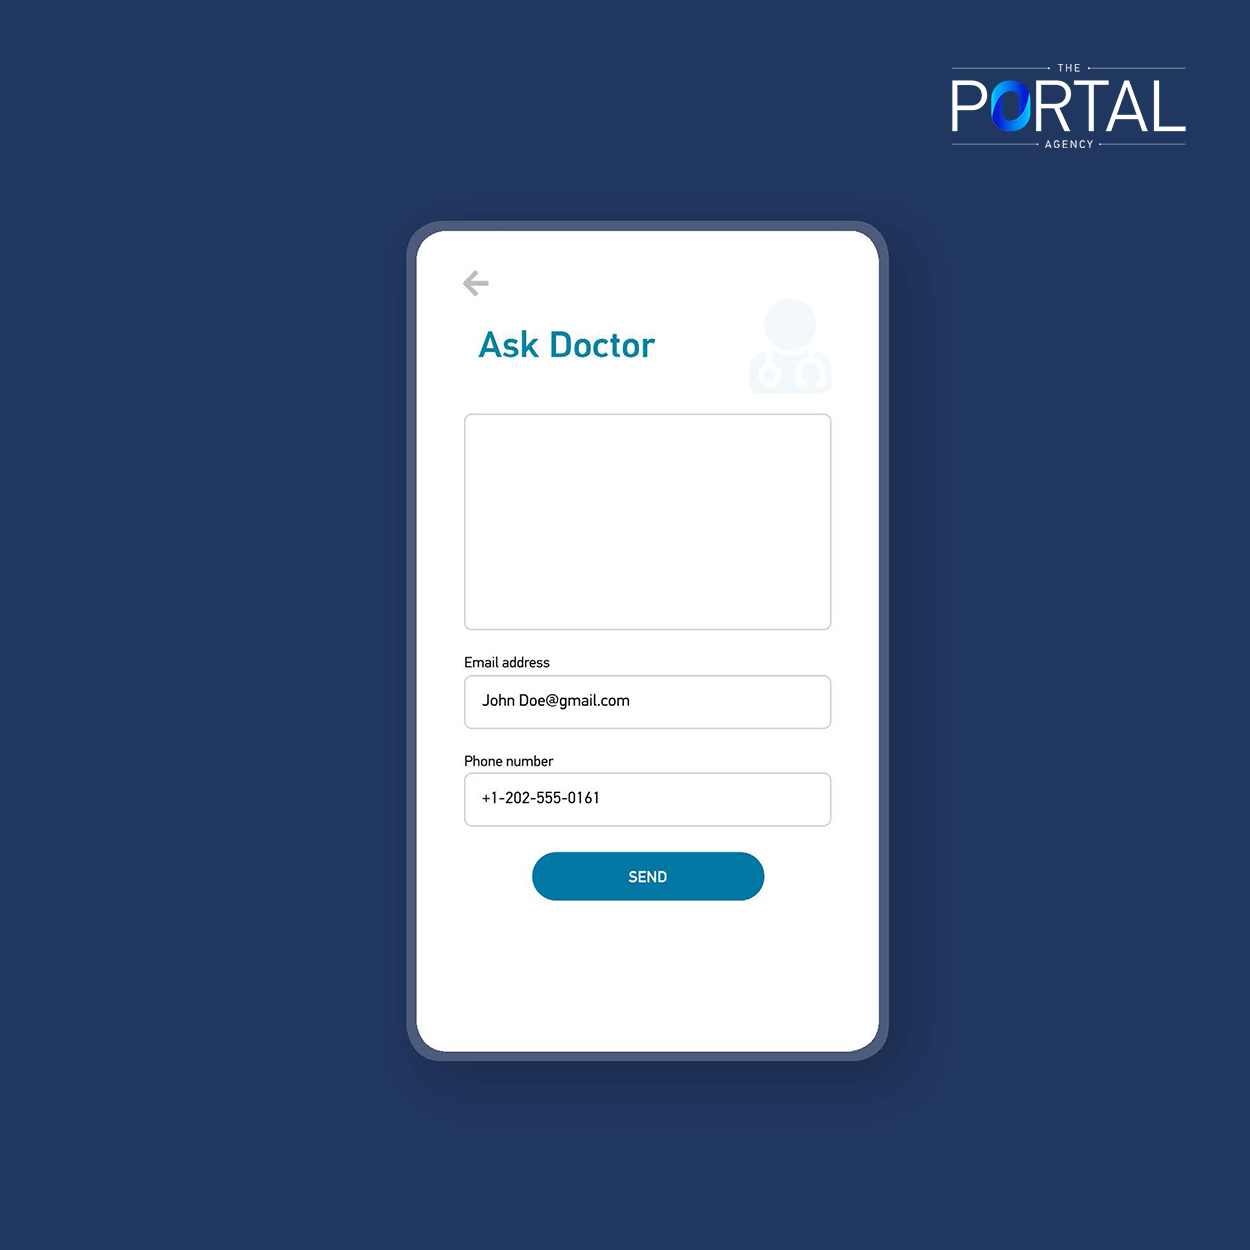 https://theportalagency.com/project/portal-clinic-mobile-app/